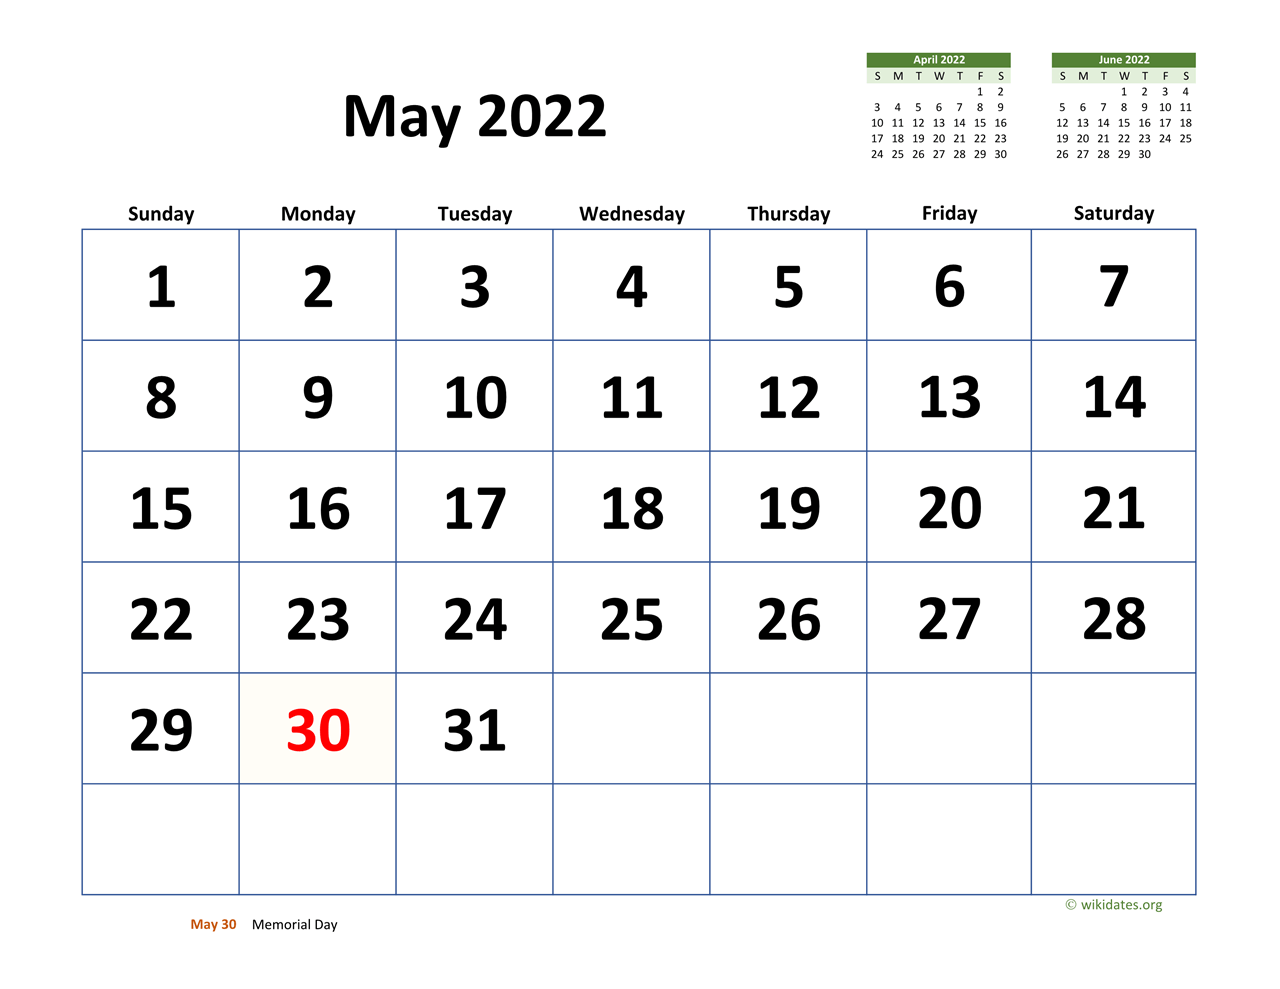 May Calendar 2022 May 2022 Calendar With Extra-Large Dates | Wikidates.org